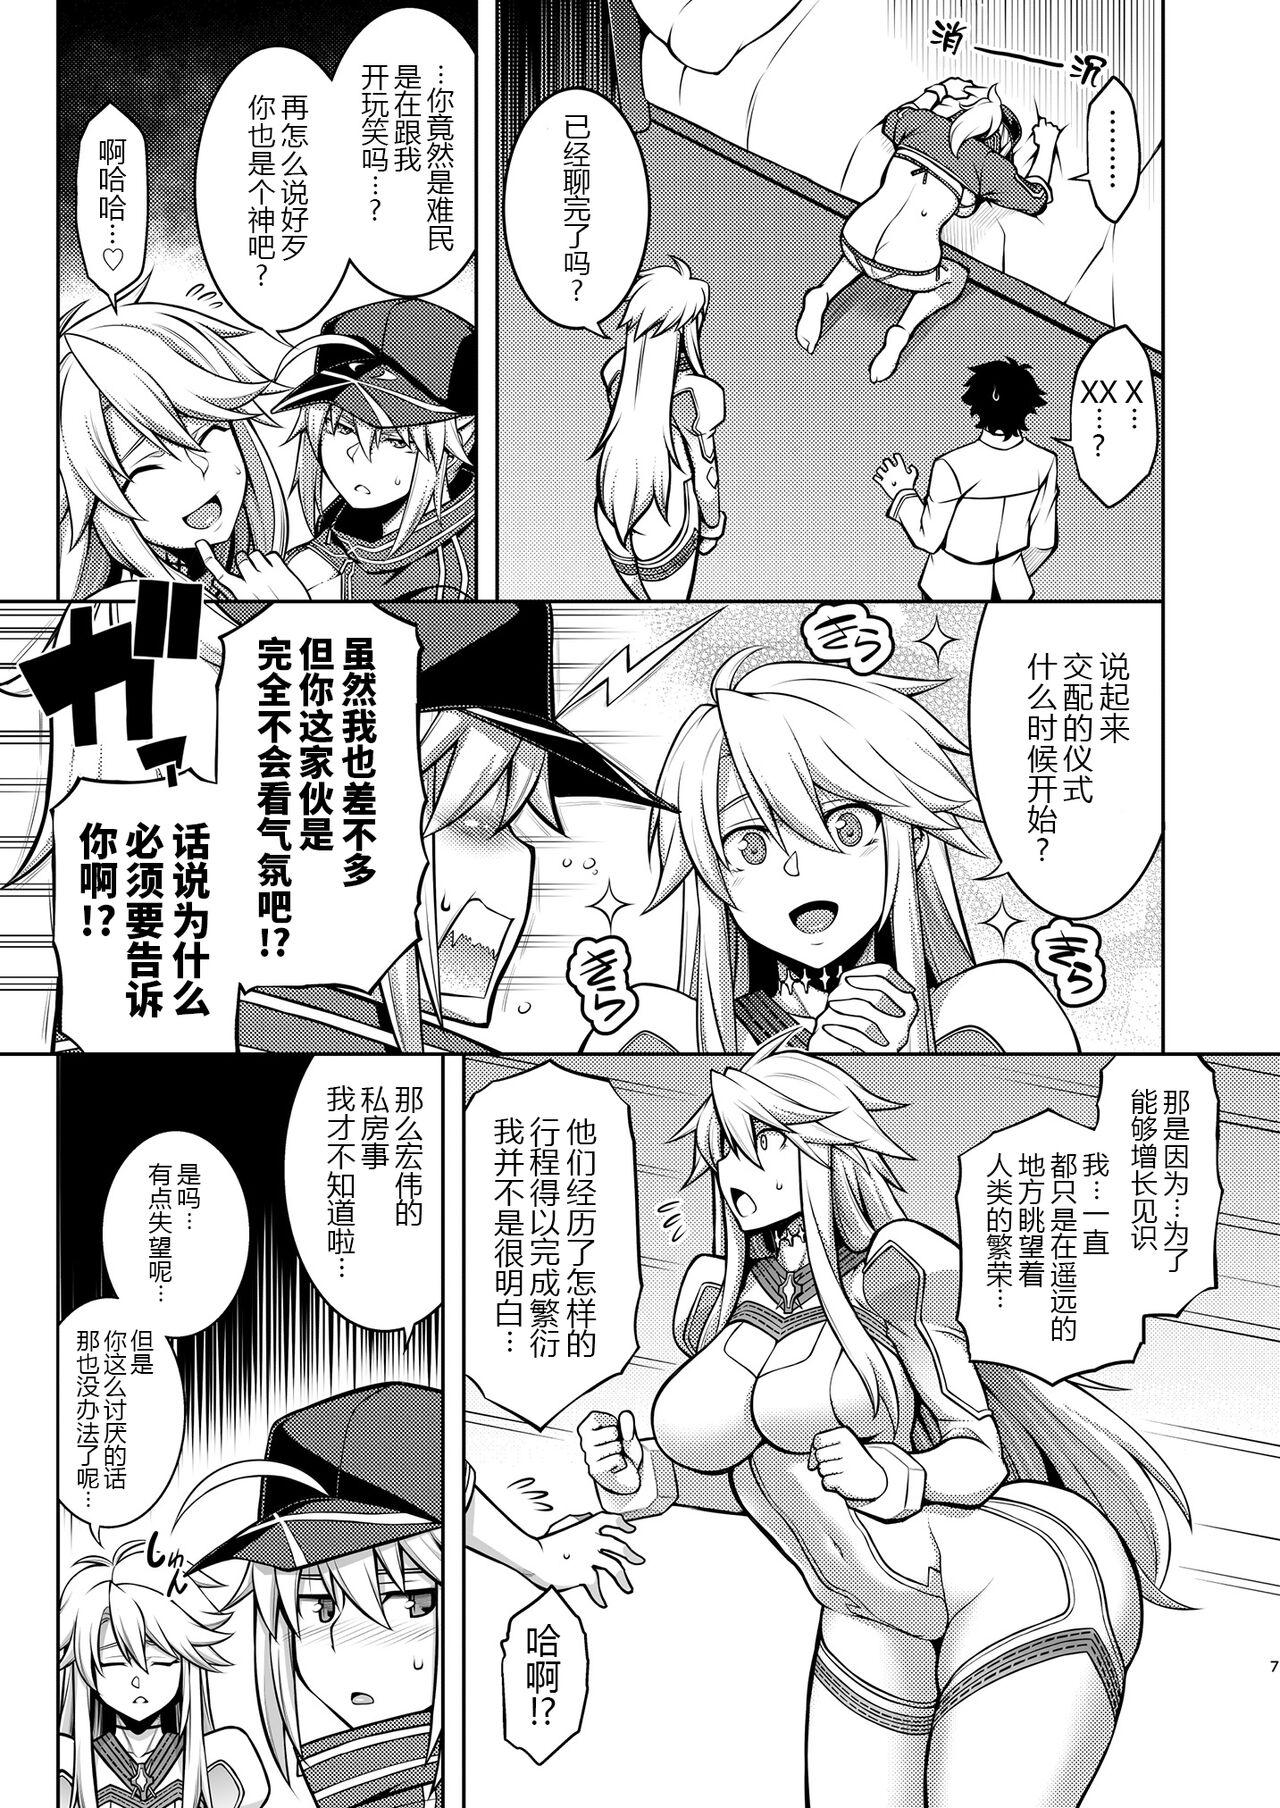 Mexican ONE ROOM - Fate grand order Mas - Page 8